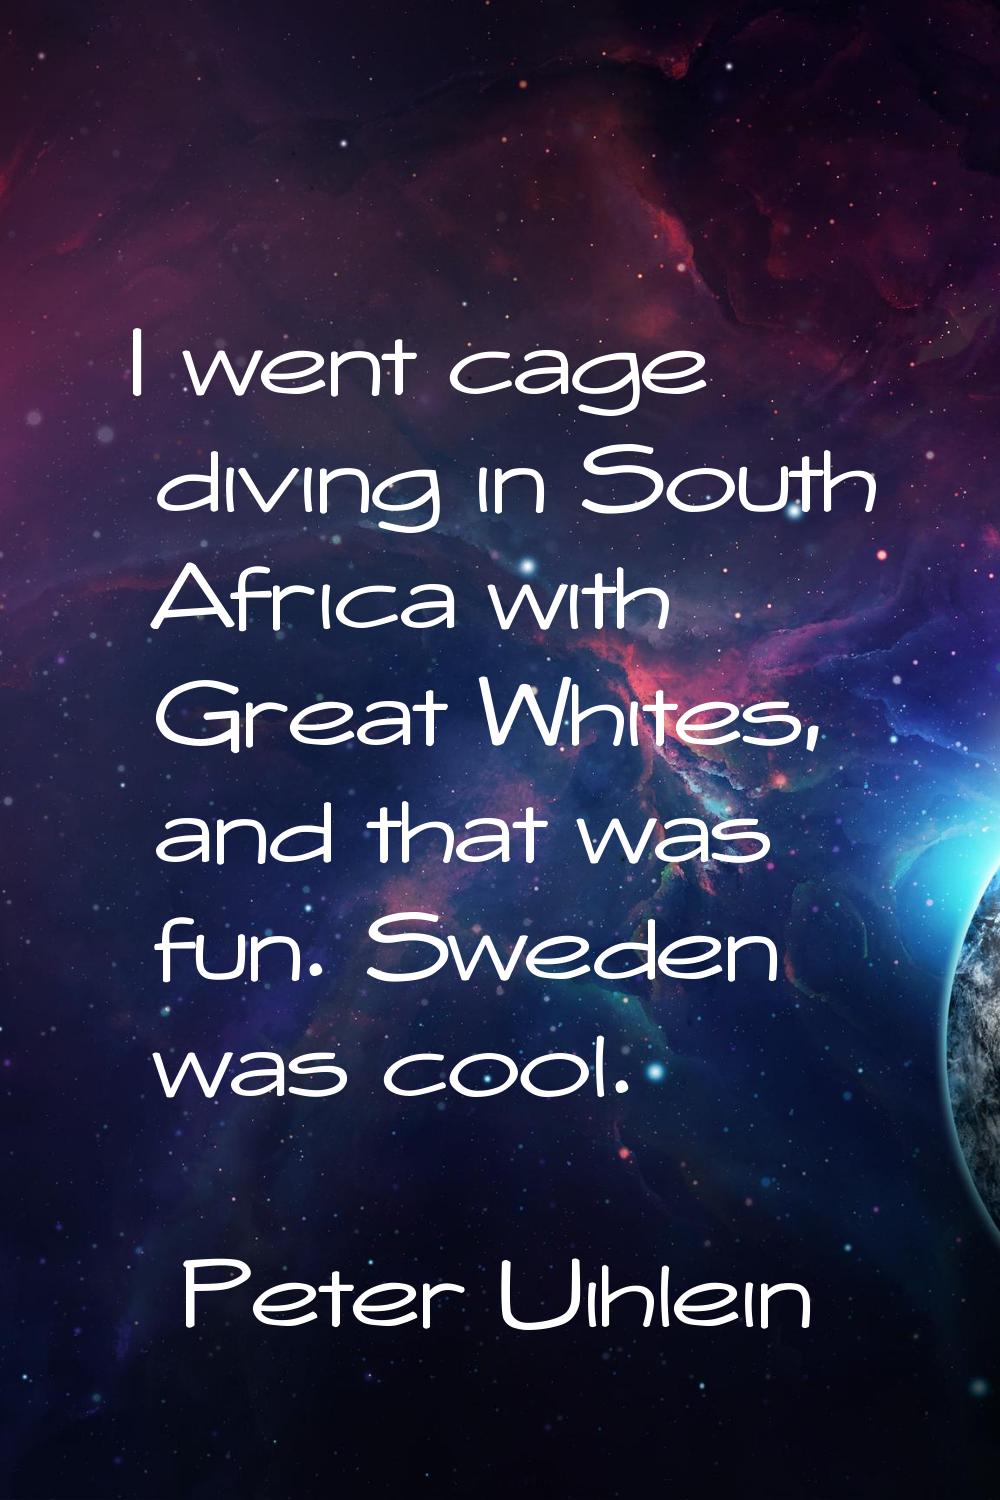 I went cage diving in South Africa with Great Whites, and that was fun. Sweden was cool.